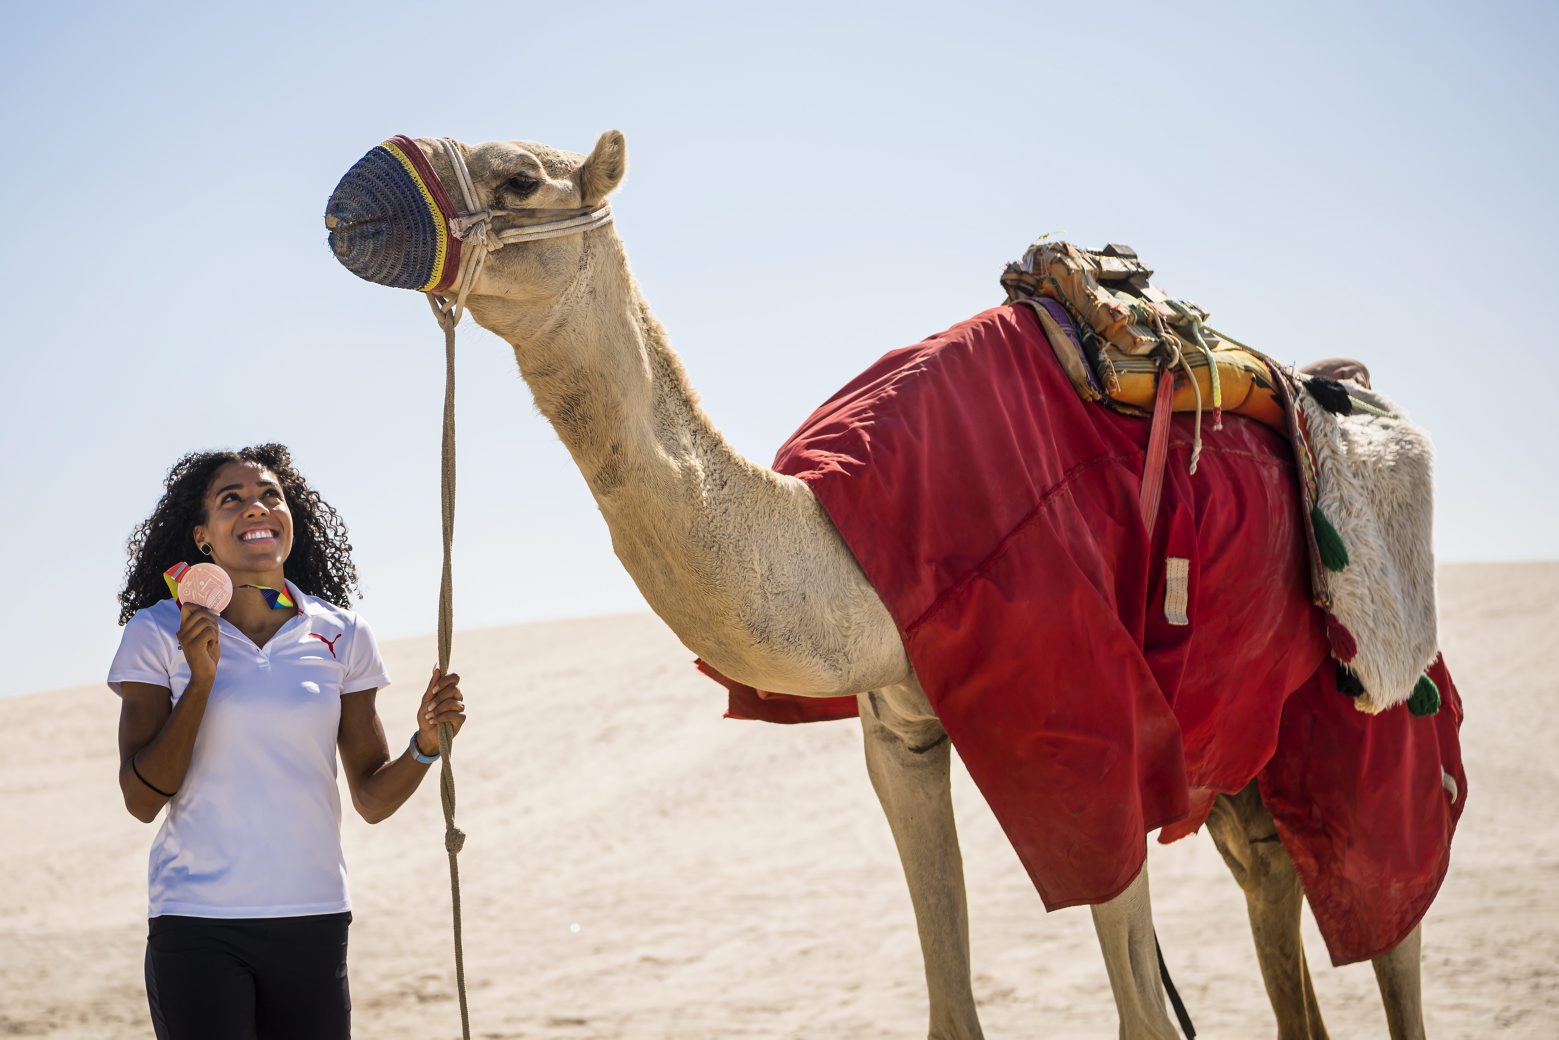 Mujinga Kambundji from Switzerland poses with a camel and the bronze medal of the women's 200 meters race during the IAAF World Athletics Championships, in the sand dunes near Doha, Qatar, Sunday, October 6, 2019. (KEYSTONE/Jean-Christophe Bott) QATAR WORLD ATHLETICS CHAMPIONSHIPS